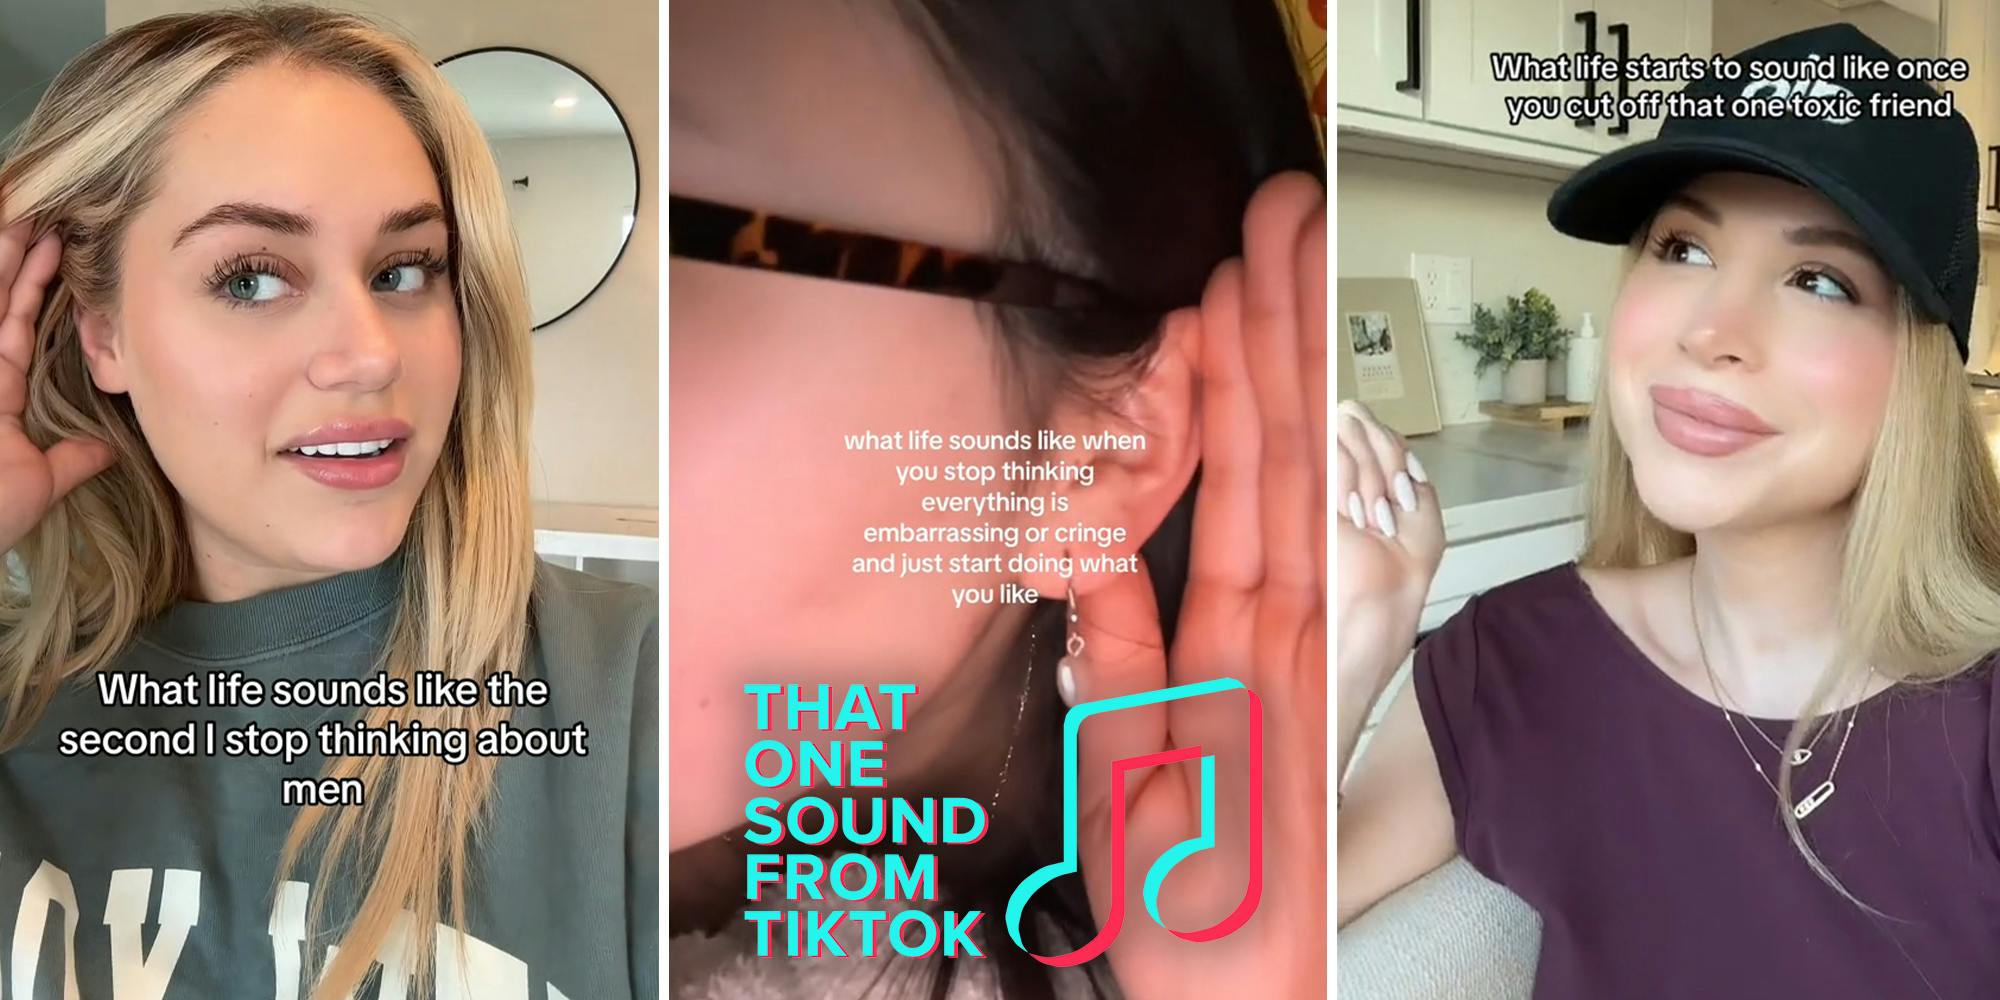 TOS - This TikTok sound is about embracing your peace